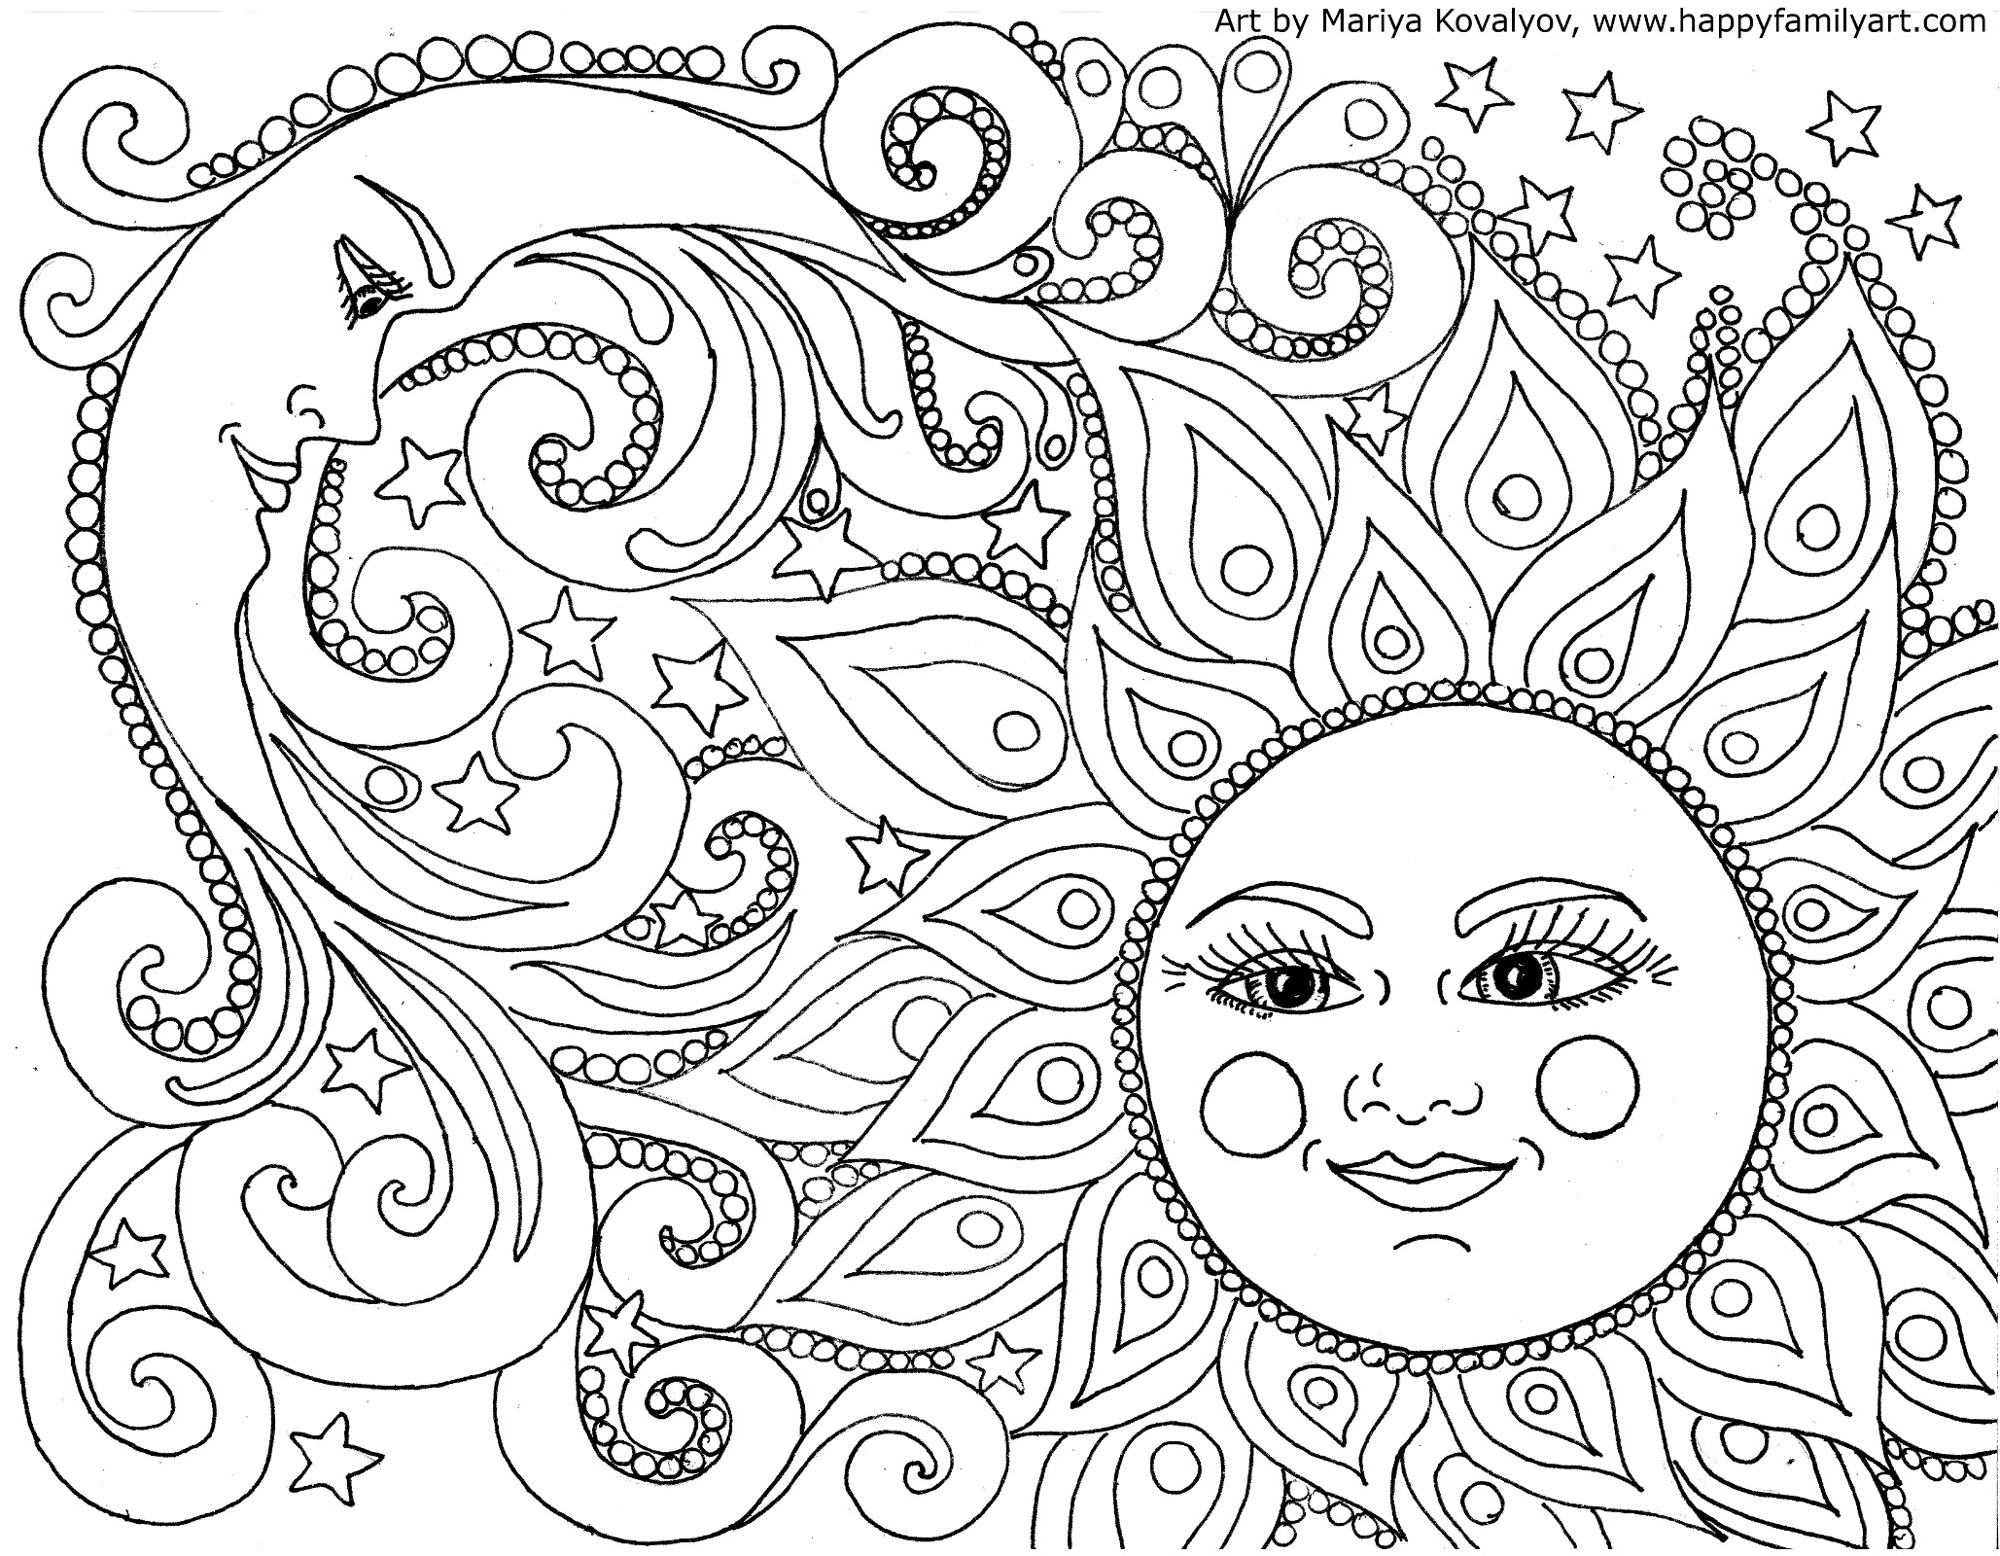 Happy Family Art Original And Fun Coloring Pages